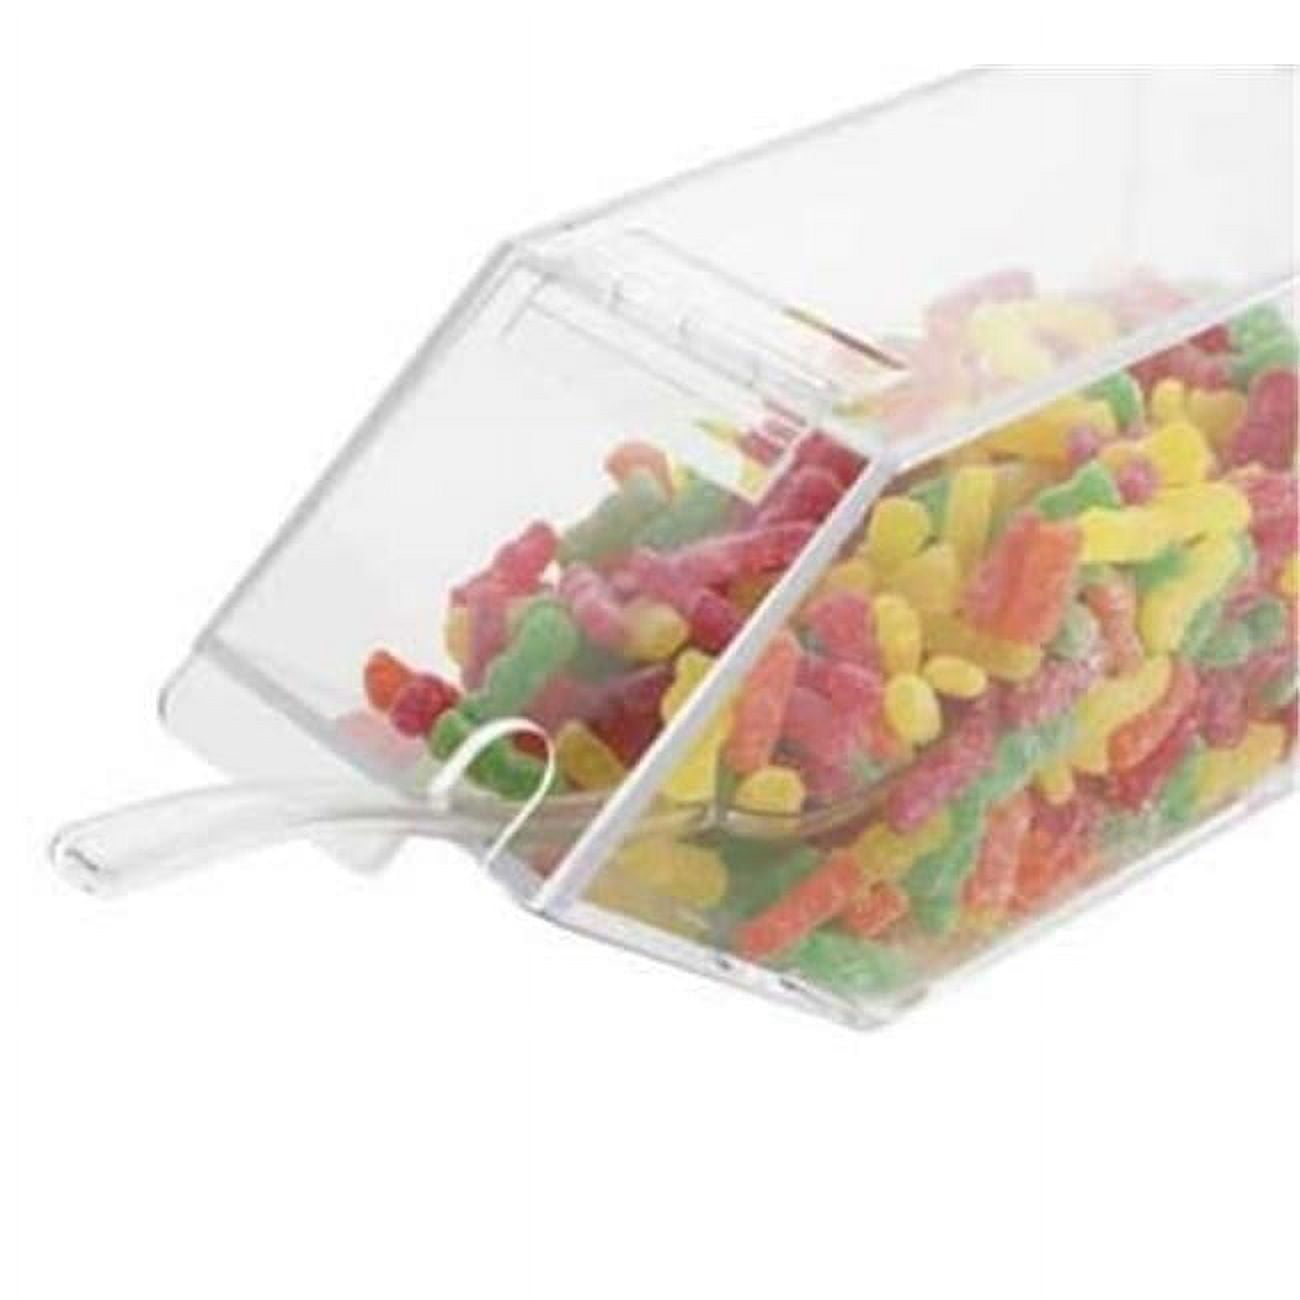 492-n Classic Stackable Topping Dispenser With Notch Lid - 4.5 X 11 X 5.5 In.